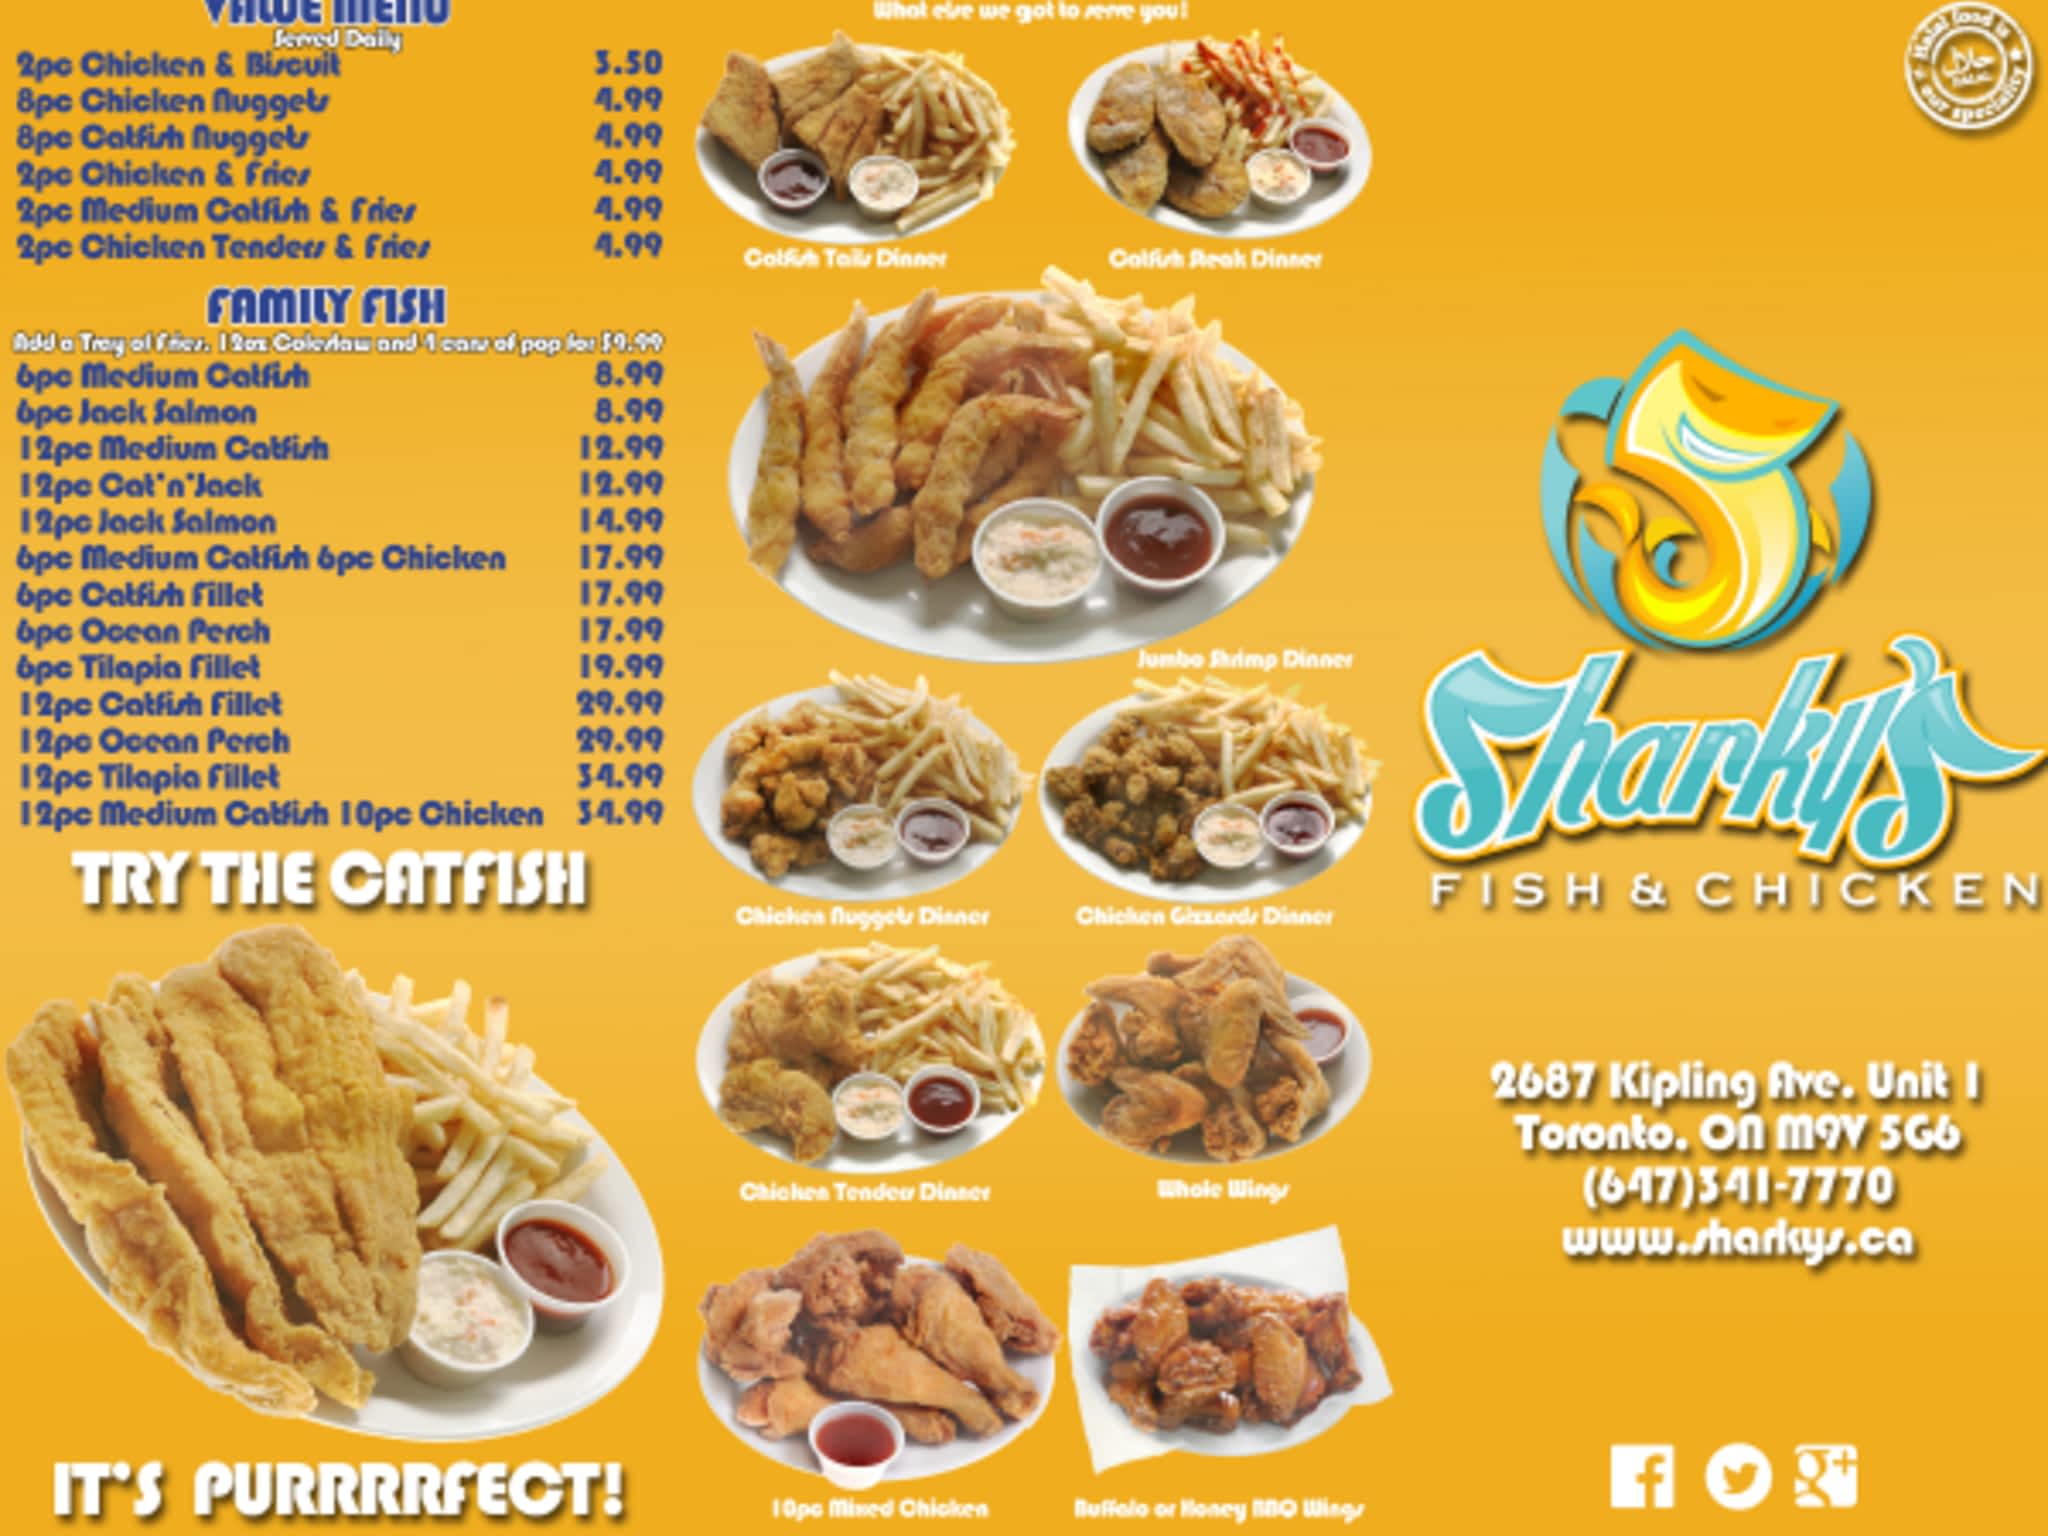 photo Sharky's Fish And Chicken